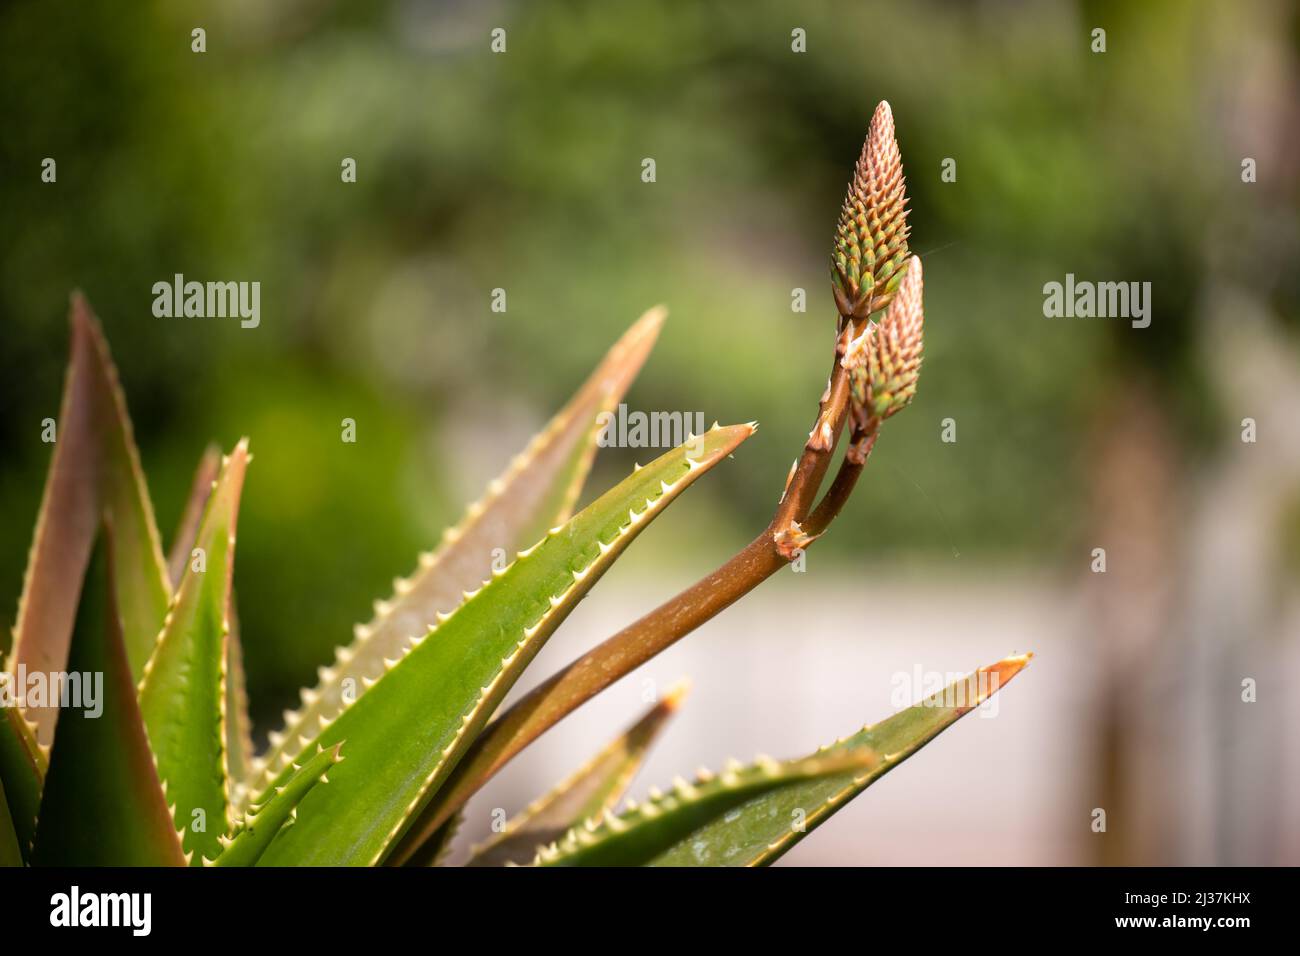 Aloe vera plant and flower in a garden in selective focus. Stock Photo